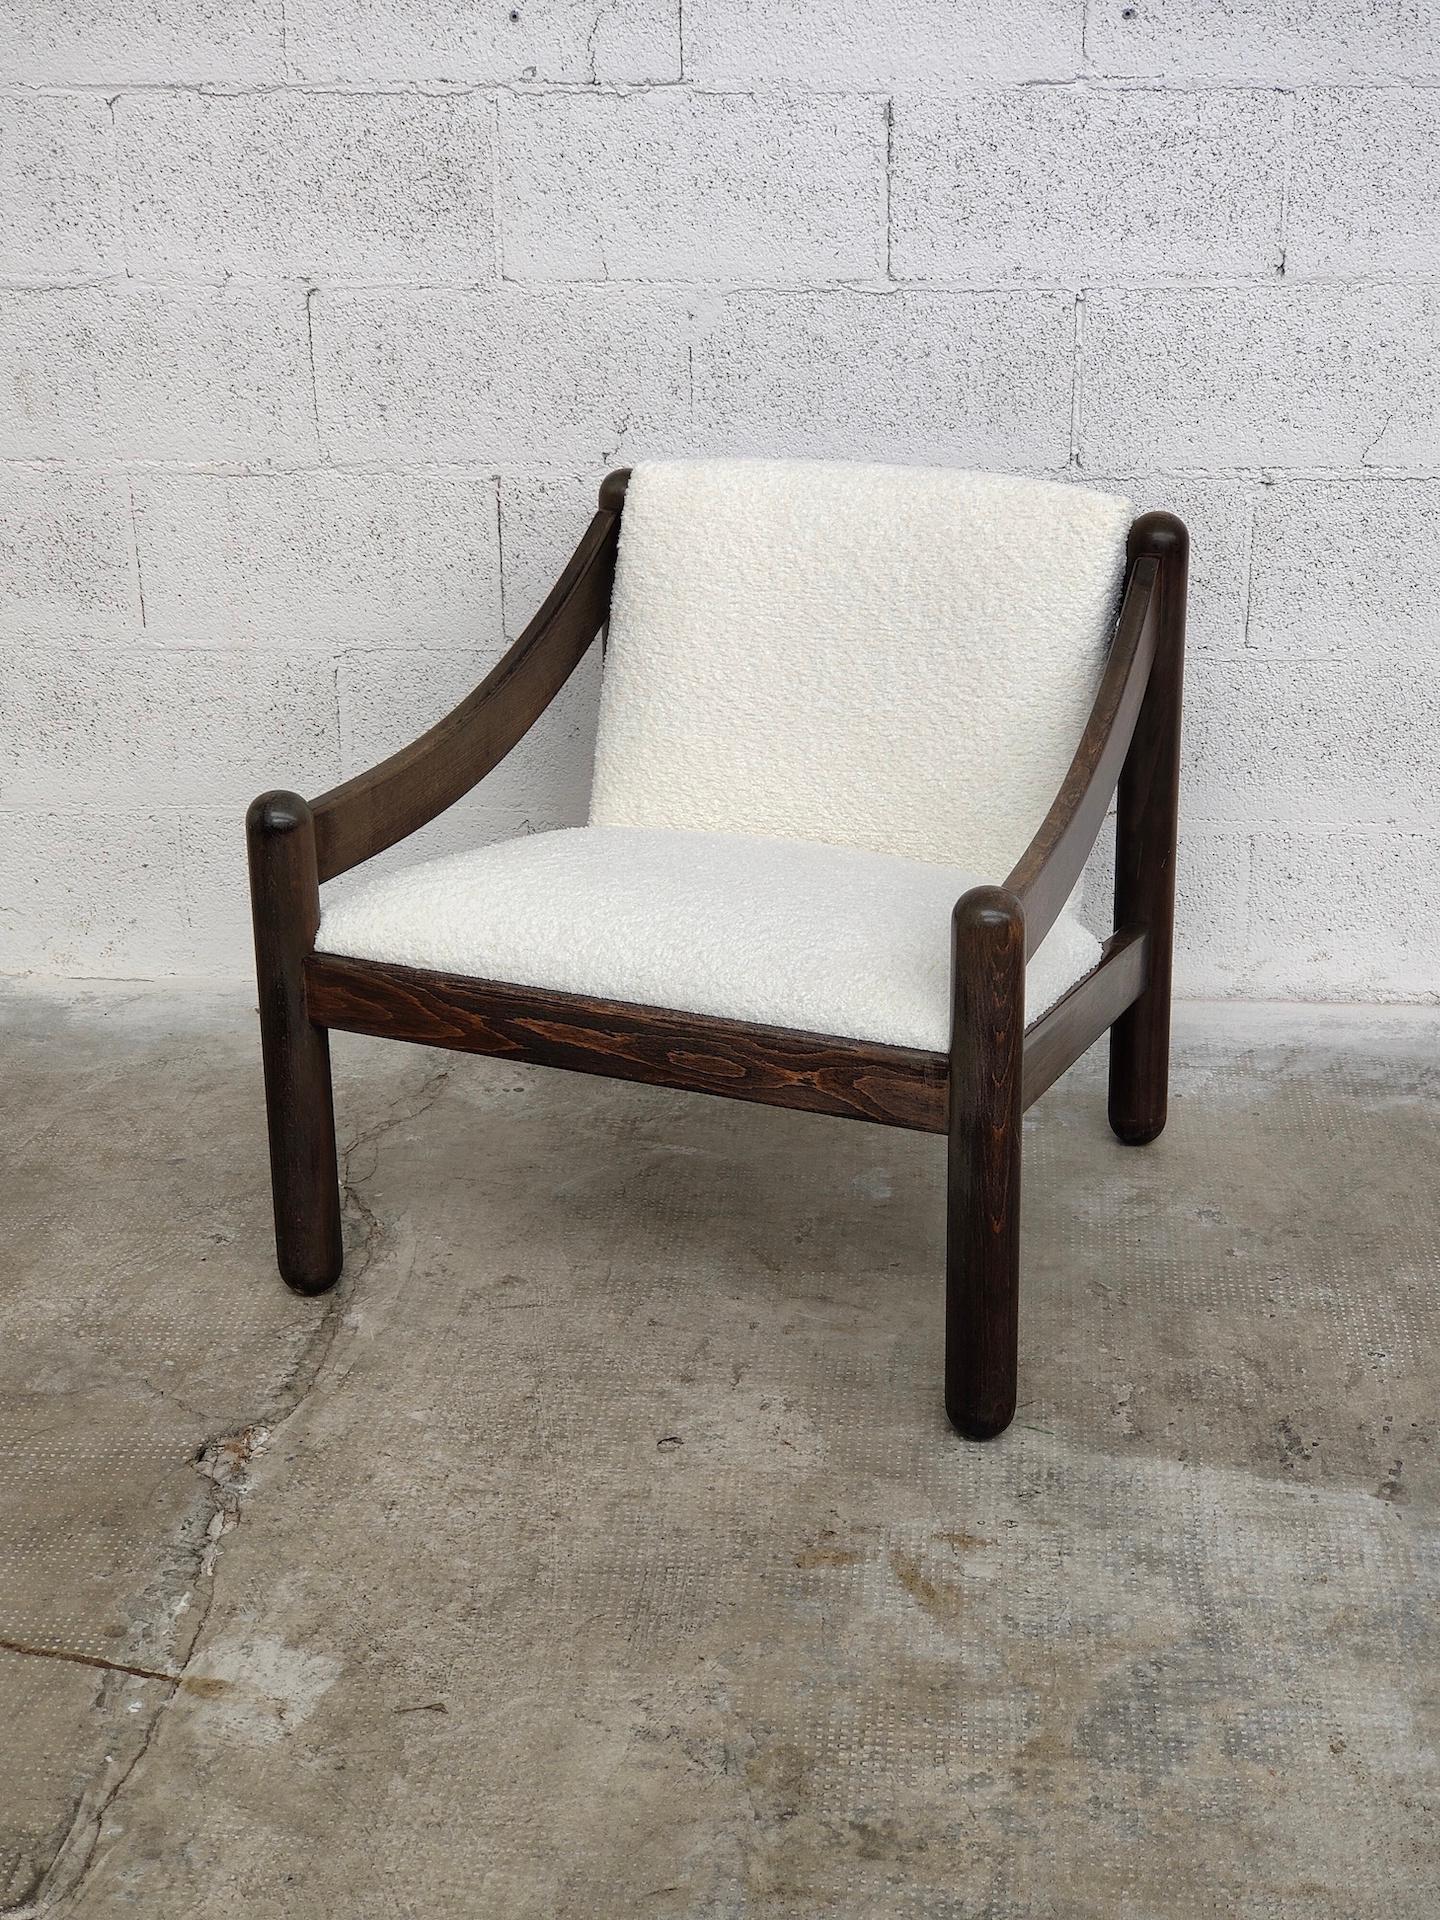 Model 930 armchair for the Carimate Golf Club-House, Cassina production design Vico Magistretti year 1963. Structure in brown beech wood, seat and back in white bouclè upholstery. Manufacturing label under the frame.

Cassina Spa is an Italian